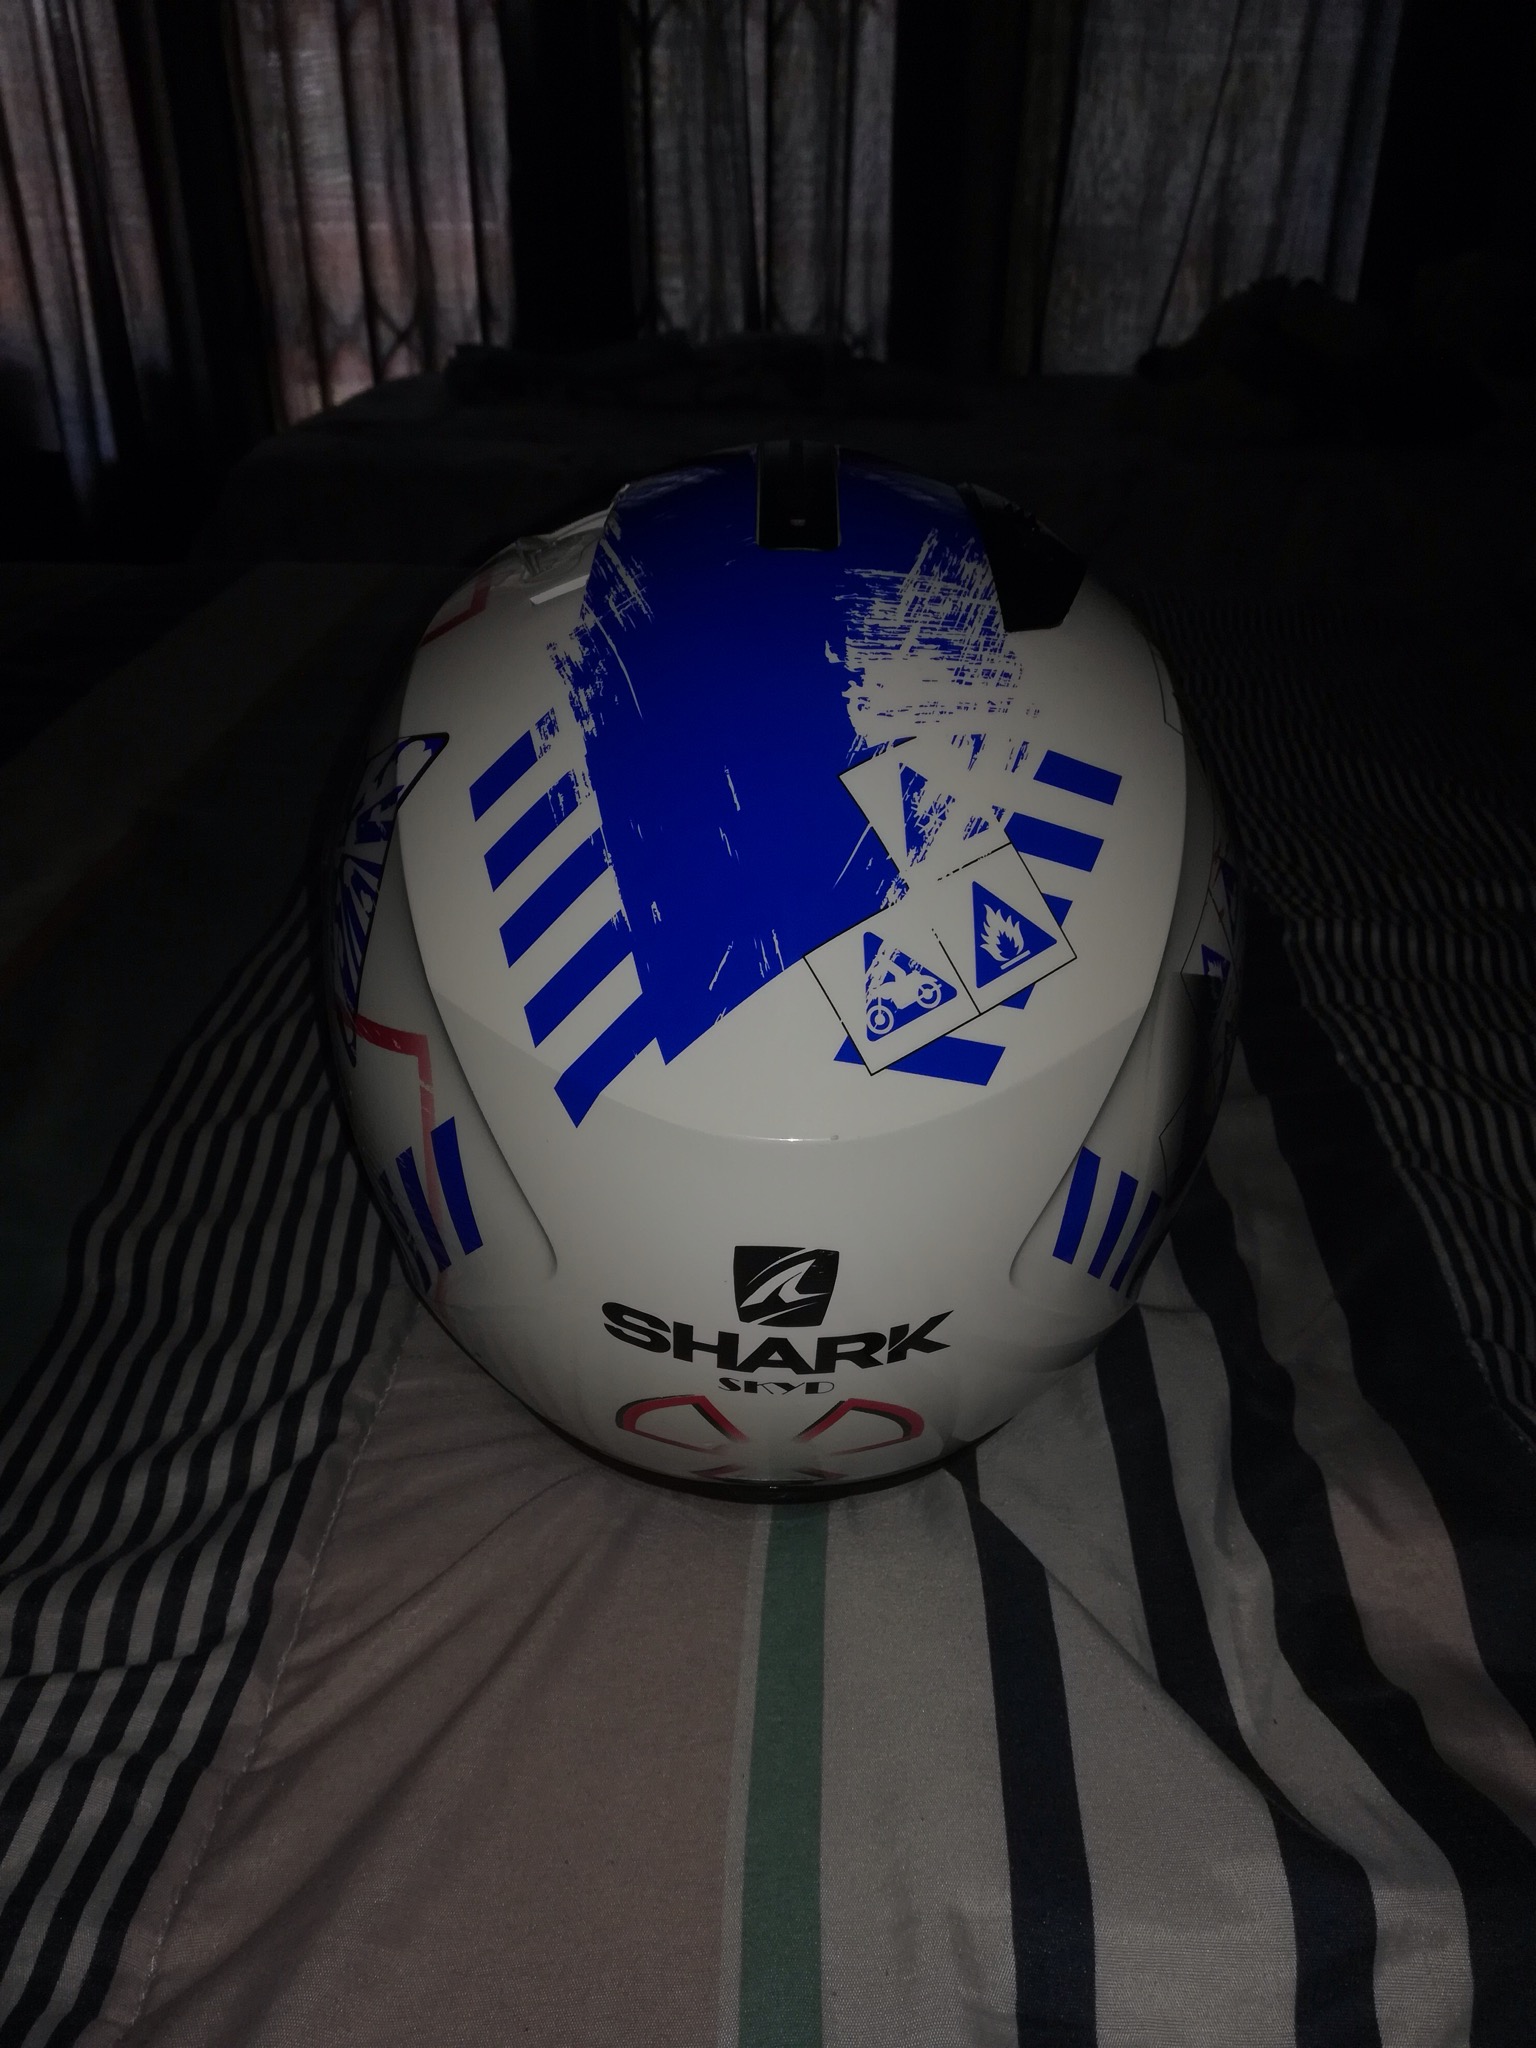 Shark helmet size small,almost brand new,only used a few times